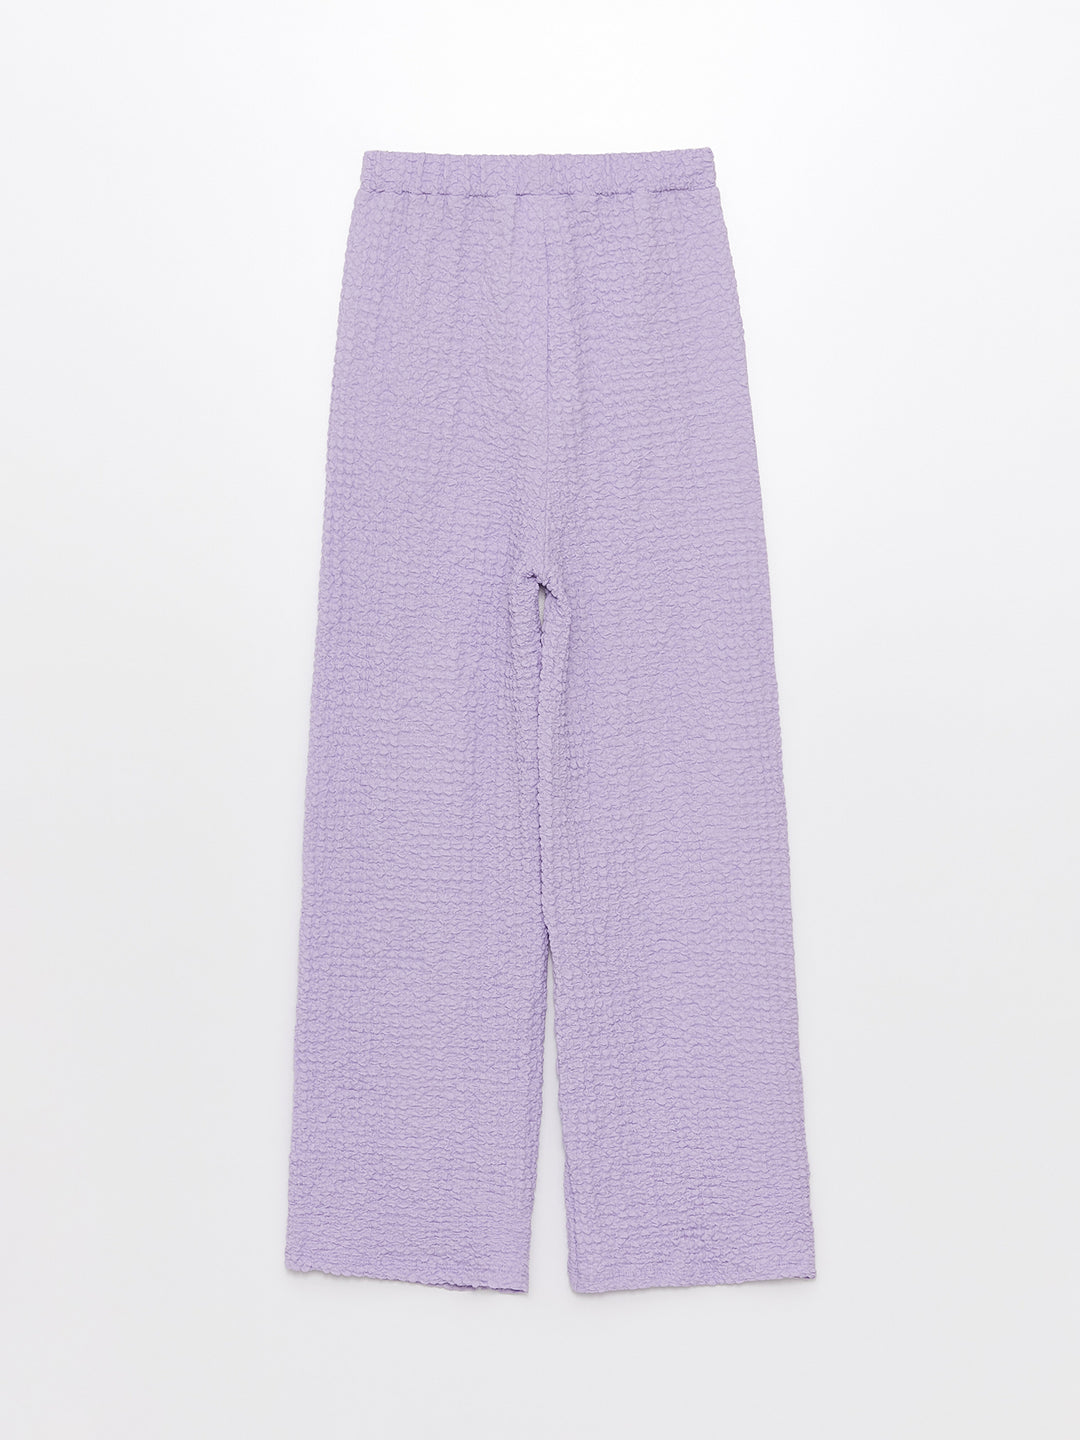 Girls Trousers with Elastic Waist